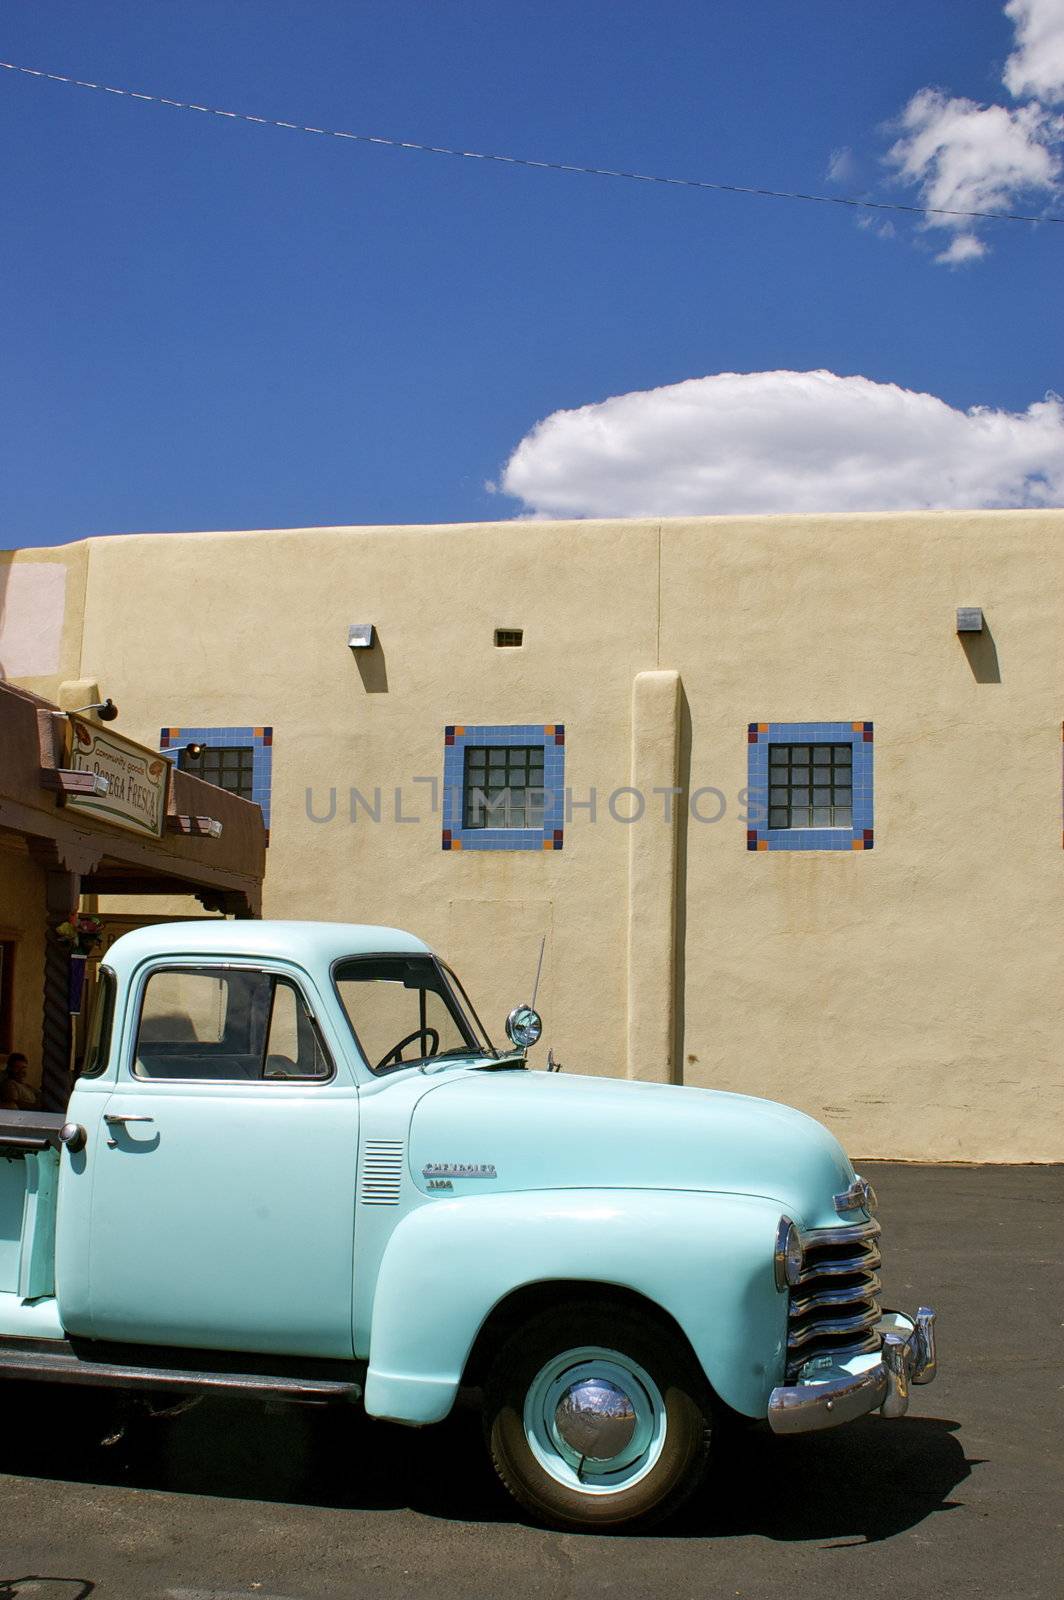 Vintage blue truck parked in front of an adobe building against a blue sky with copy space.